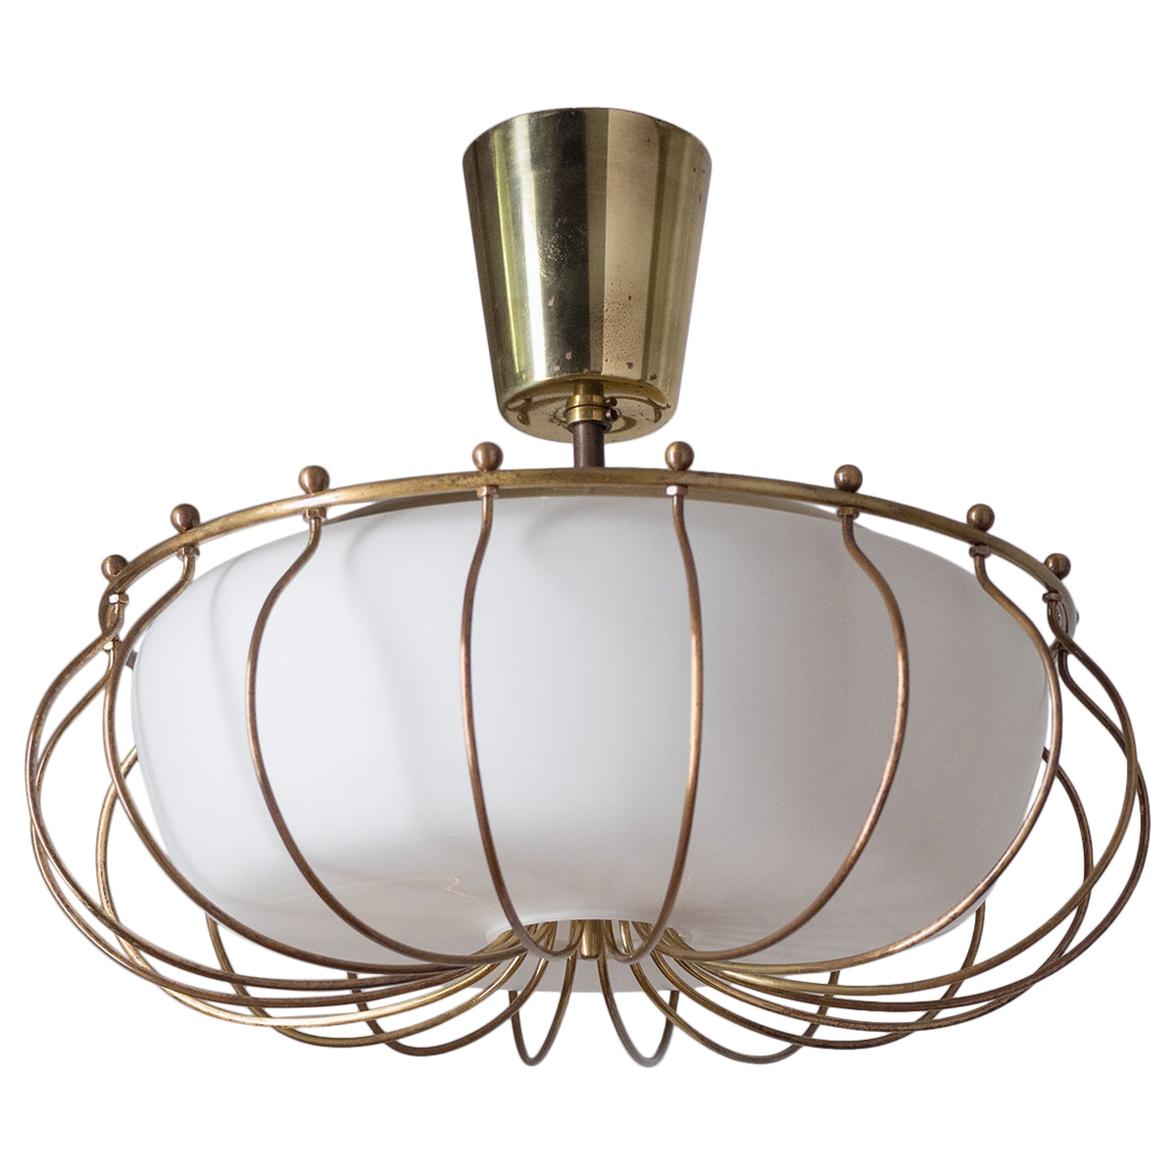 Ceiling Light, 1940s, Brass and Satin Glass